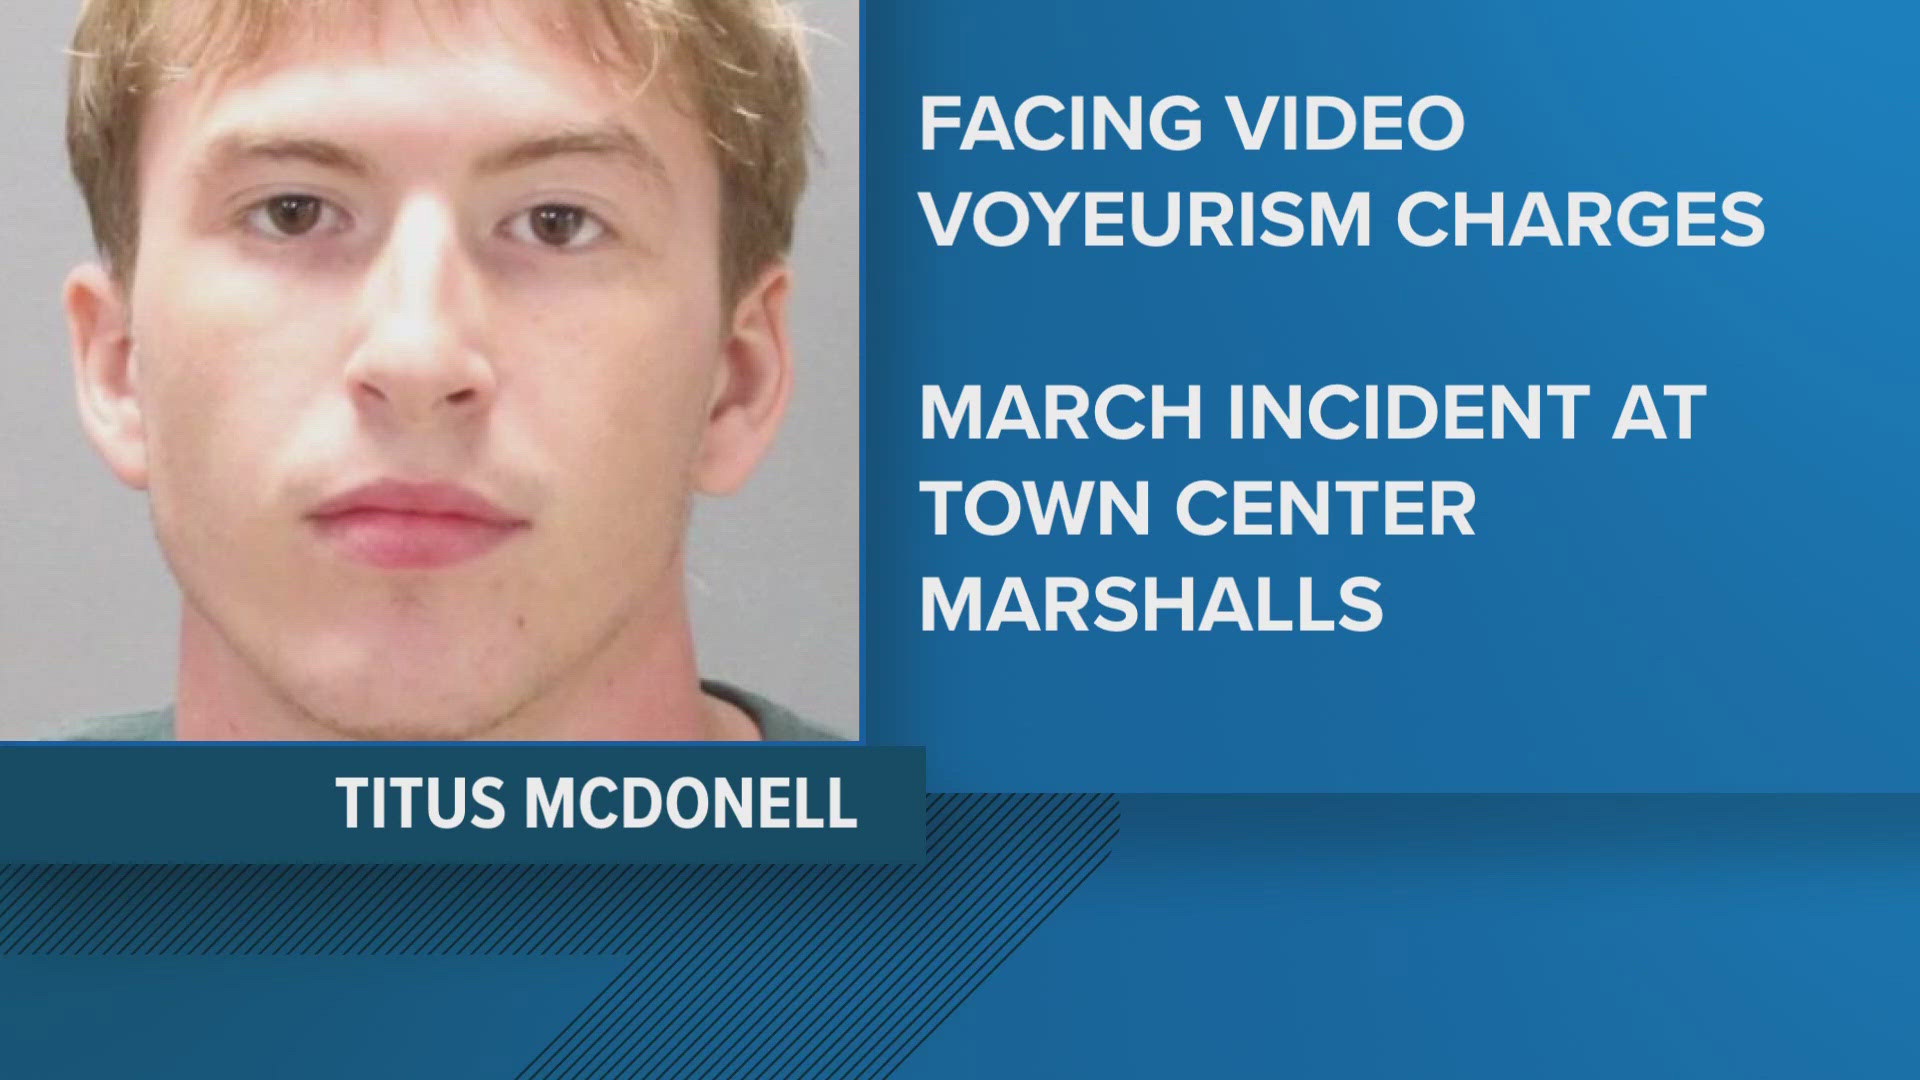 The Jacksonville Sheriff's Office jail records show Titus Hugh McDonell, 18, was arrested on Wednesday night and remains in custody Saturday evening.